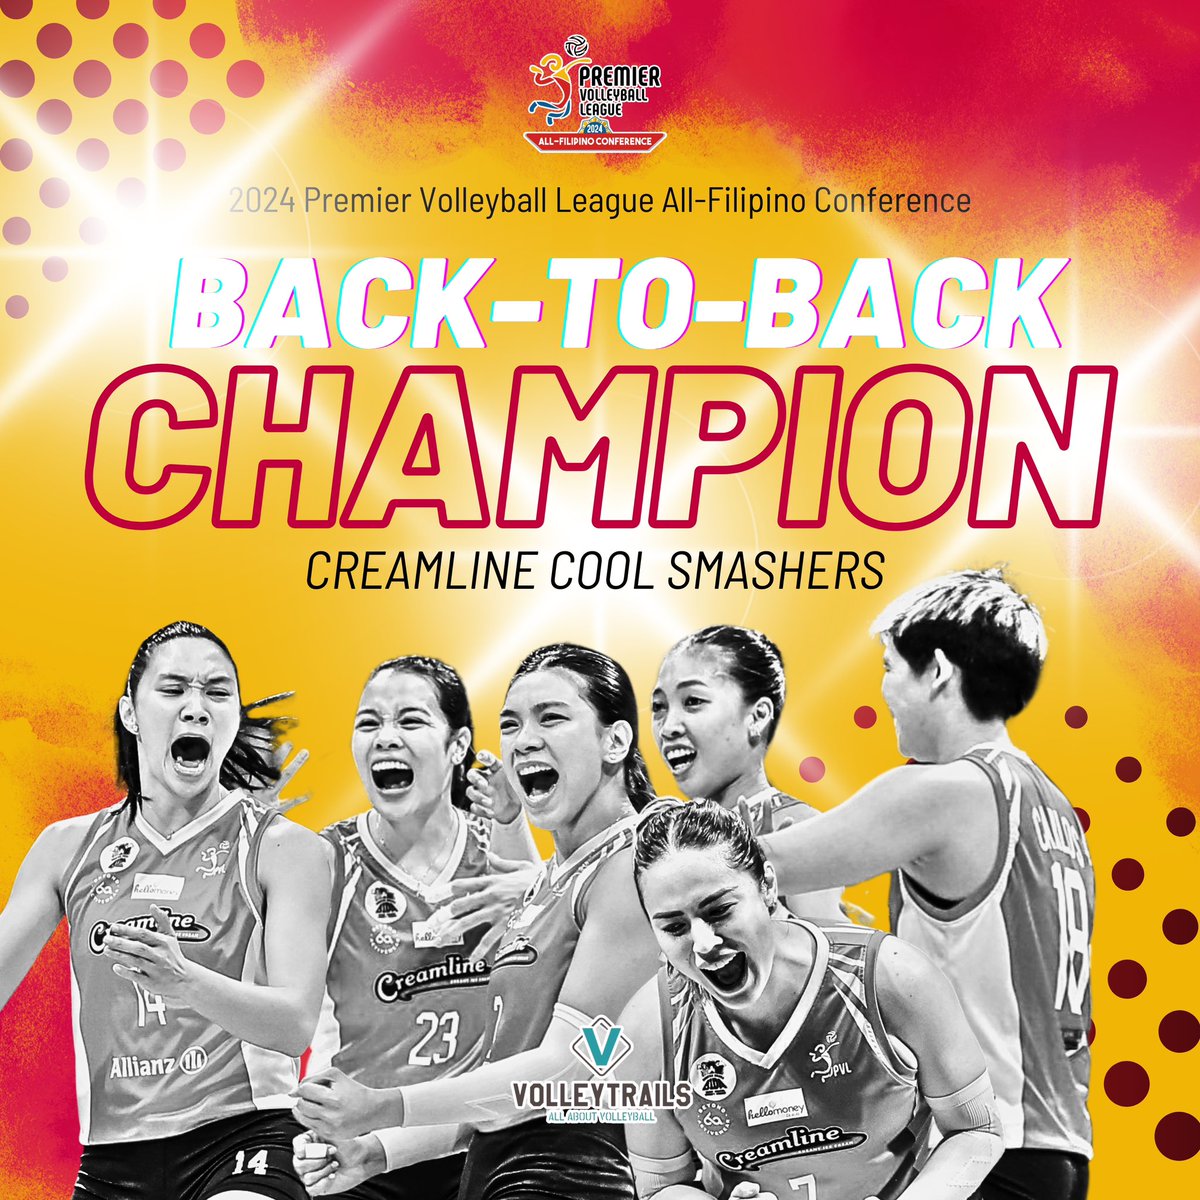 JUST IN: BACK-TO-BACK 🏆🏆

The Creamline Cool Smashers clinch their 8th PVL title, beating the Choco Mucho Flying Titans in the Final series! Congratulations! #PVL2024 🏆👏🇵🇭